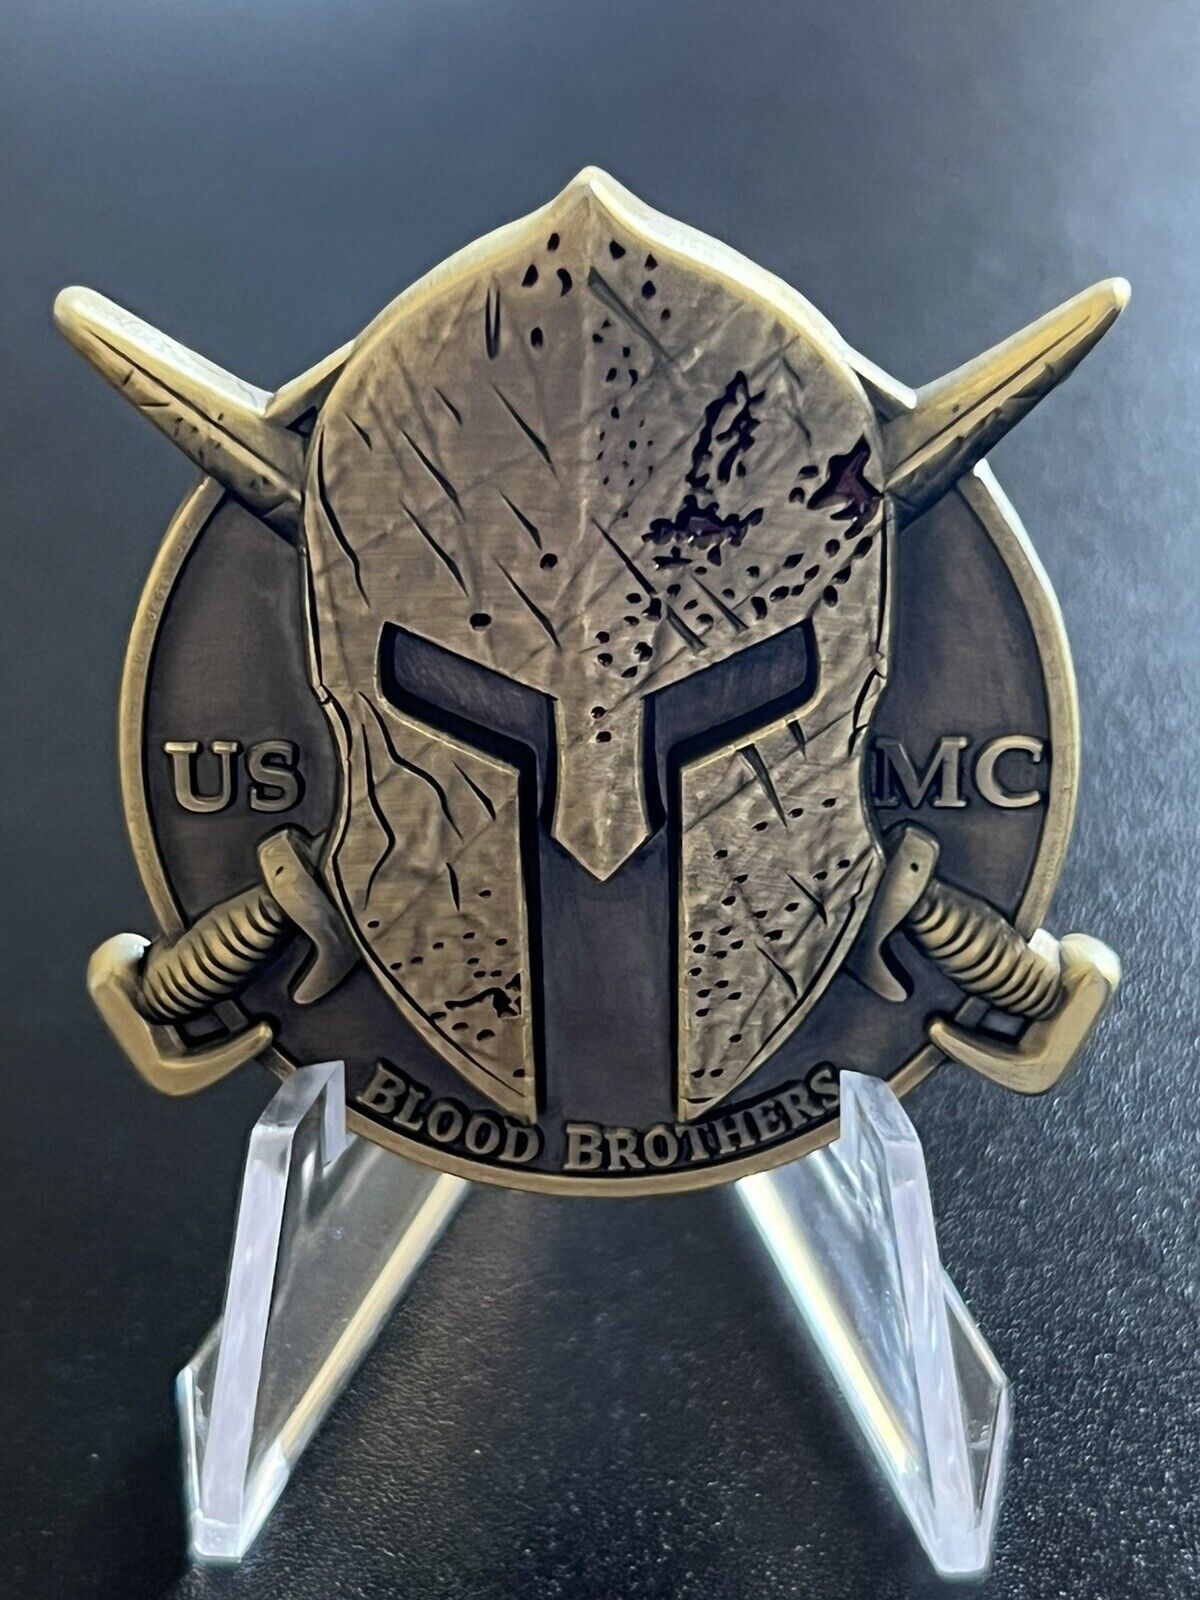 USMC SPARTAN BLOOD BROTHERS Collectible Coin Marine Corps Challenge Coin